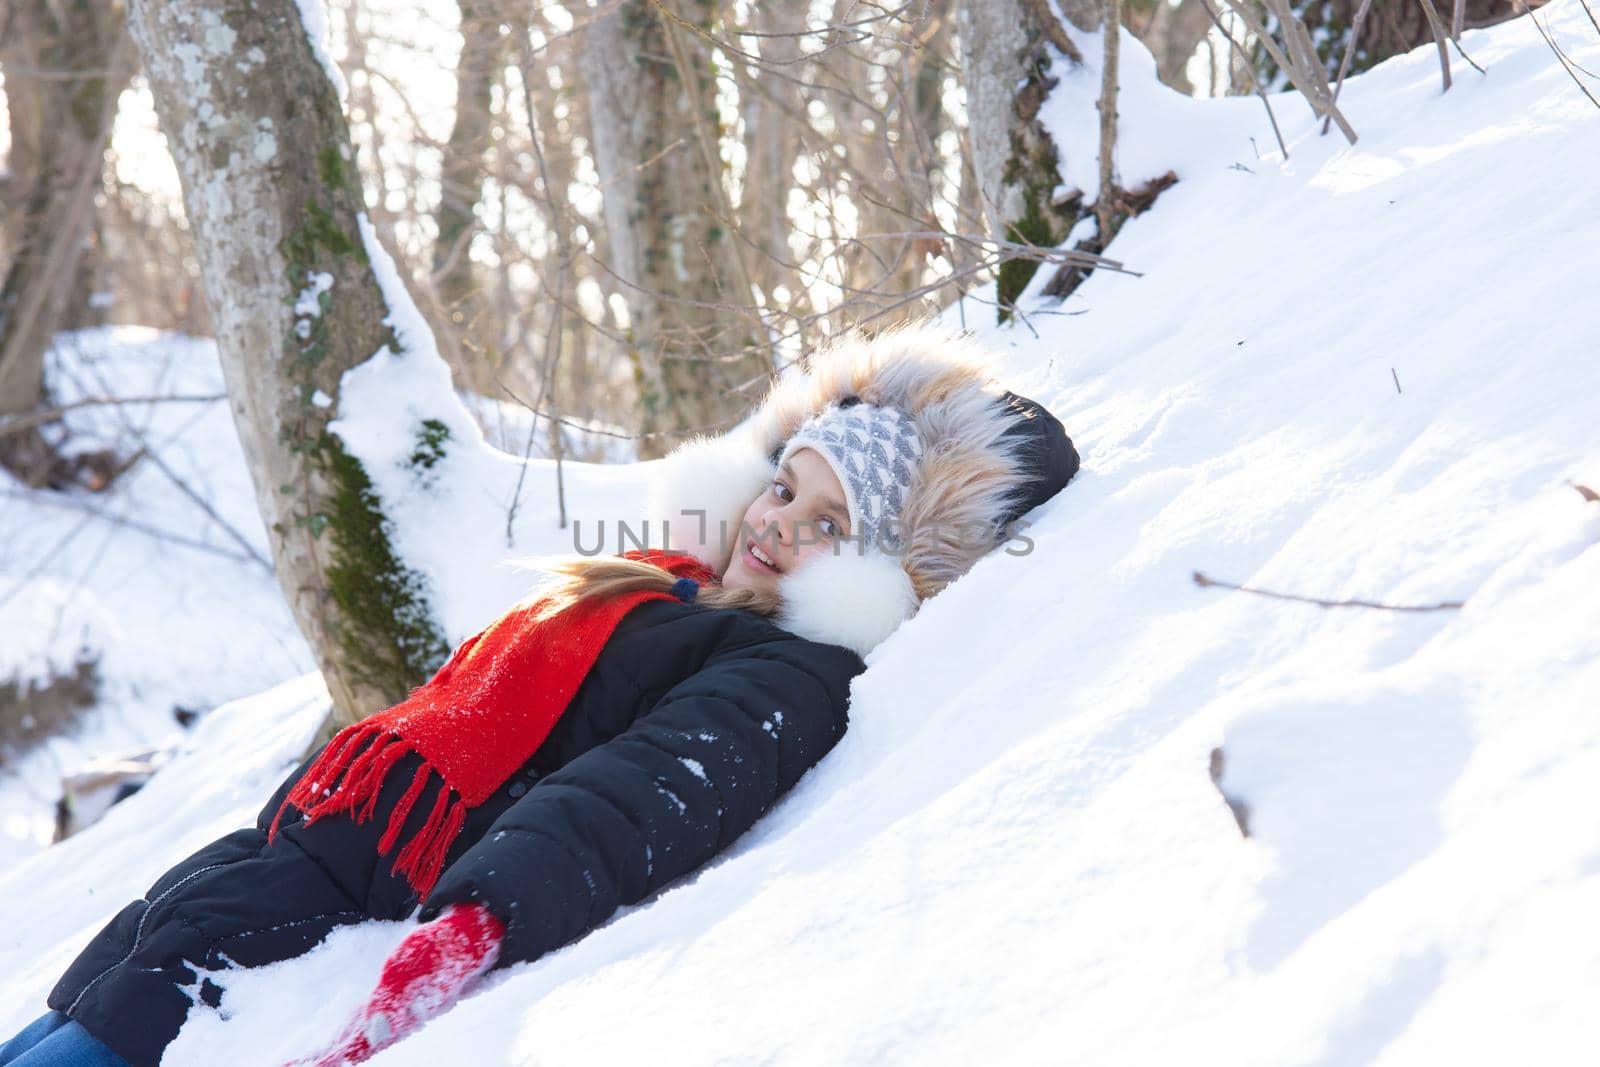 The girl fell into a snowdrift with her back and looked into the frame in a snowy forest